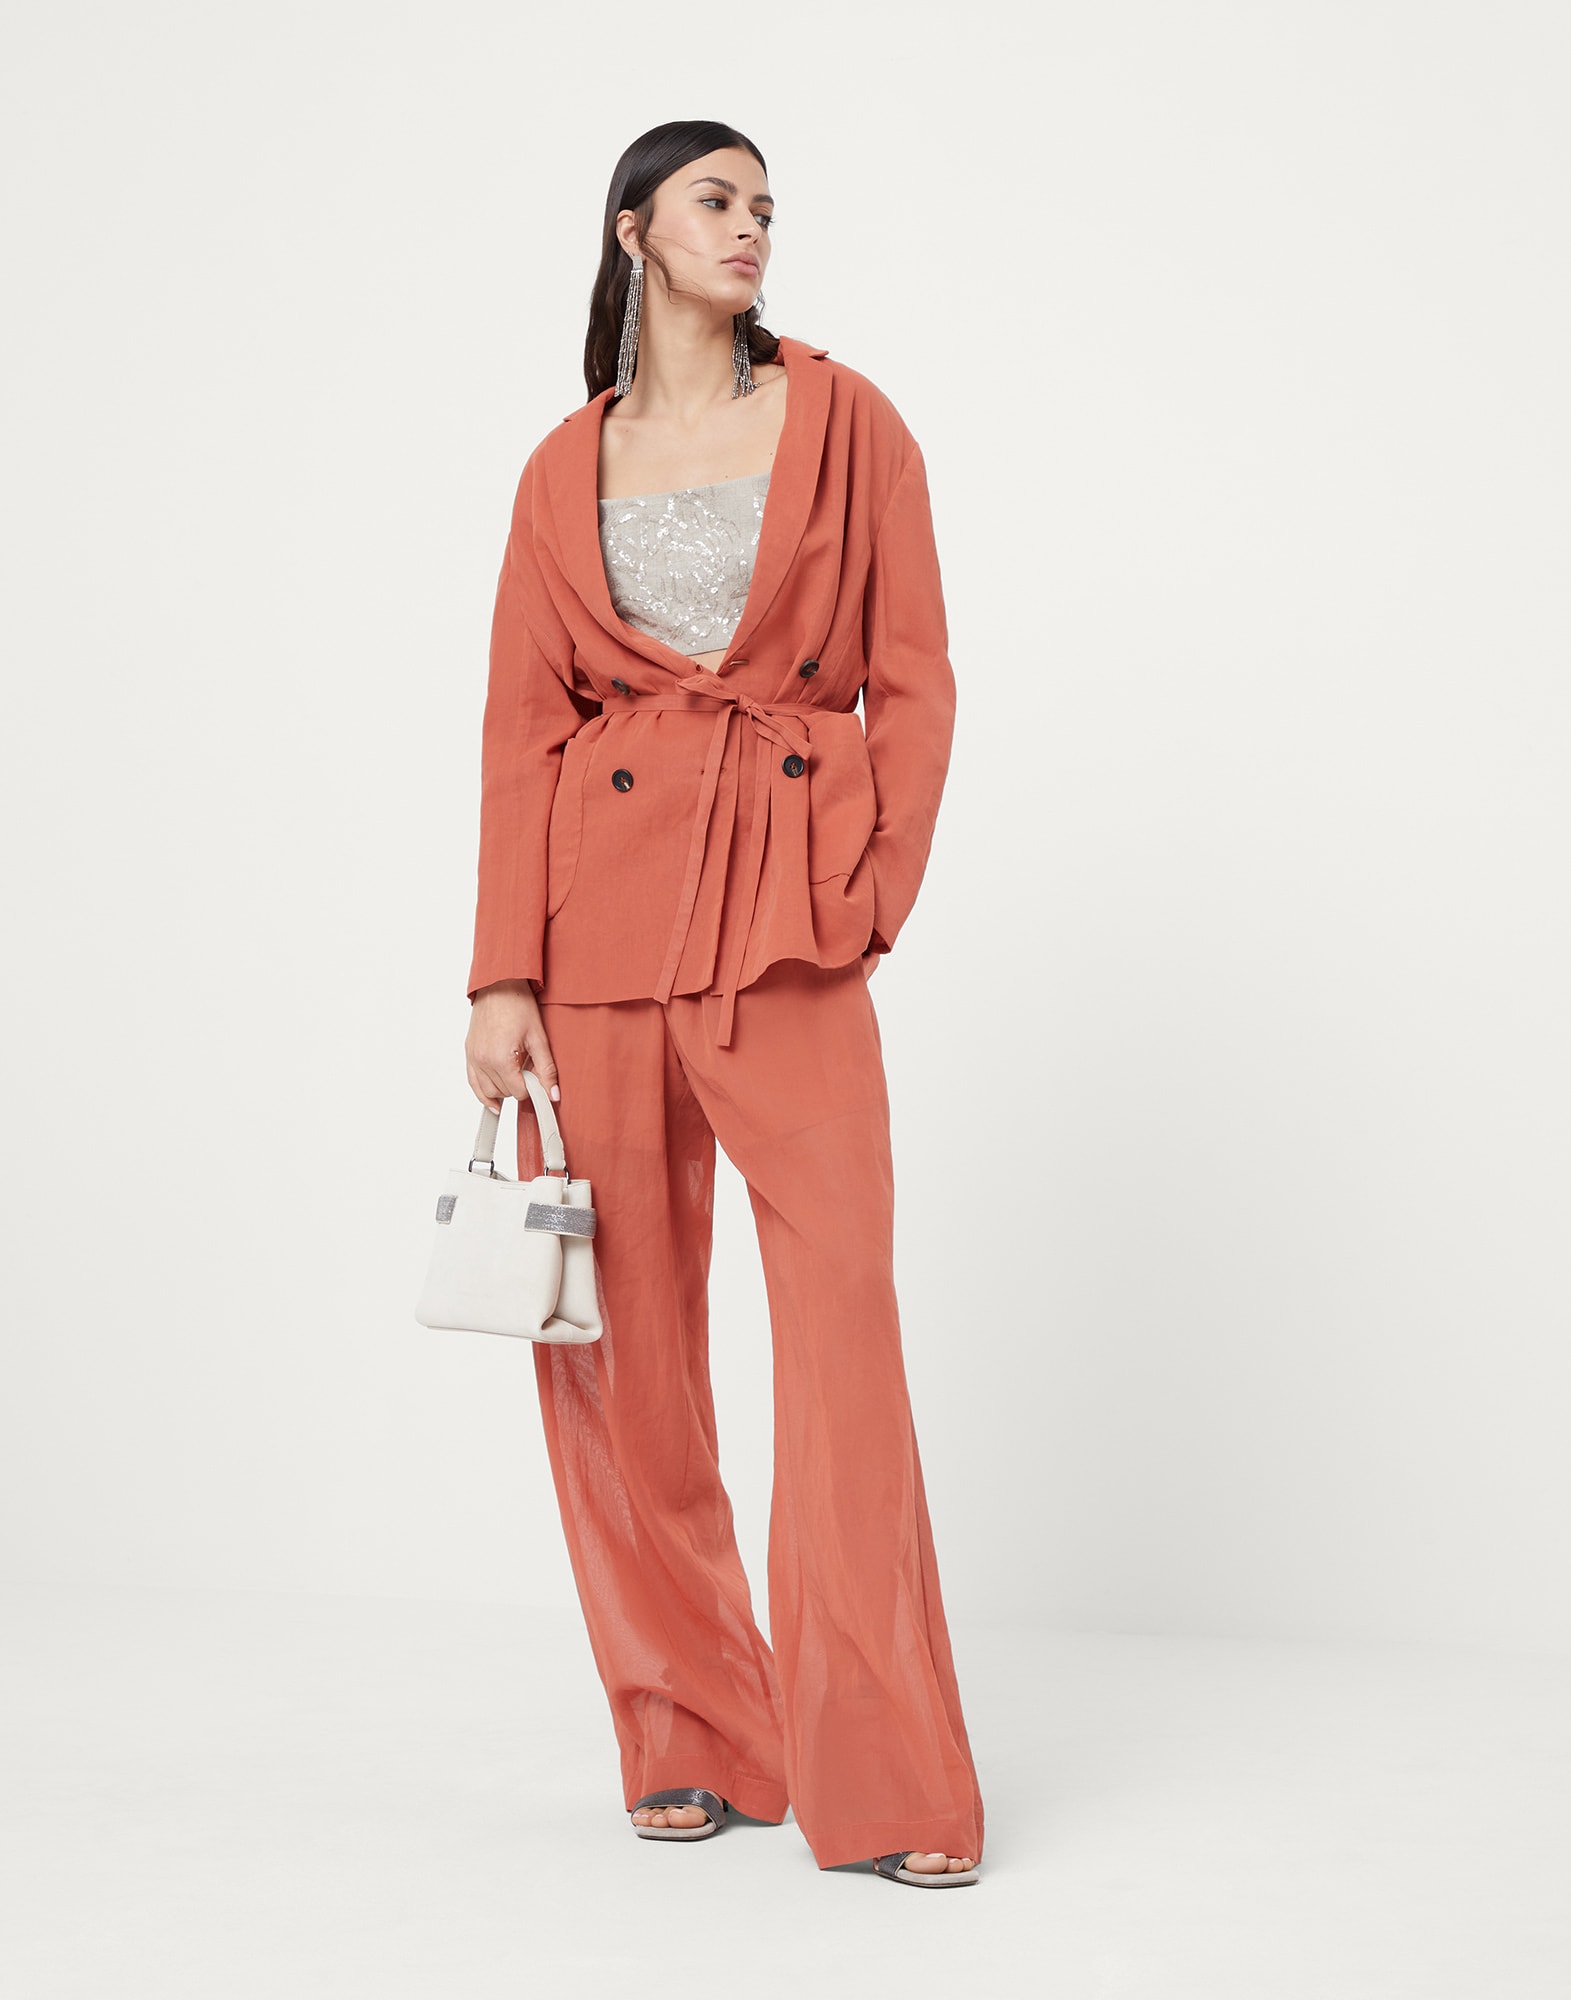 Women's outfits | Shop by Look | Brunello Cucinelli